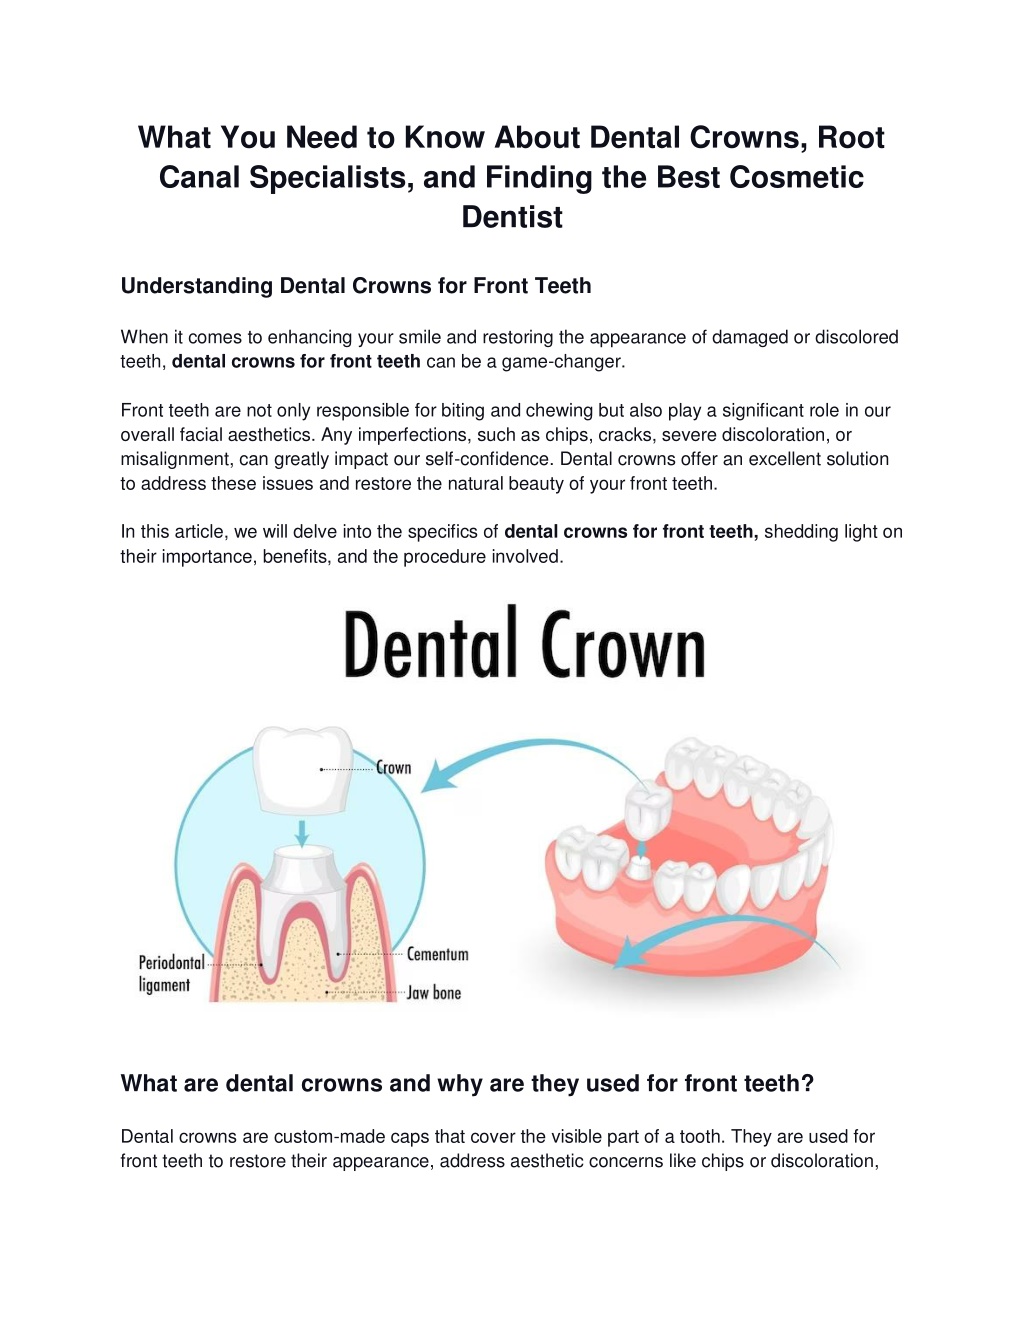 PPT - What You Need to Know About Dental Crowns, Root Canal Specialists,  and Finding the Best Cosmetic Dentist PowerPoint Presentation - ID:12429419